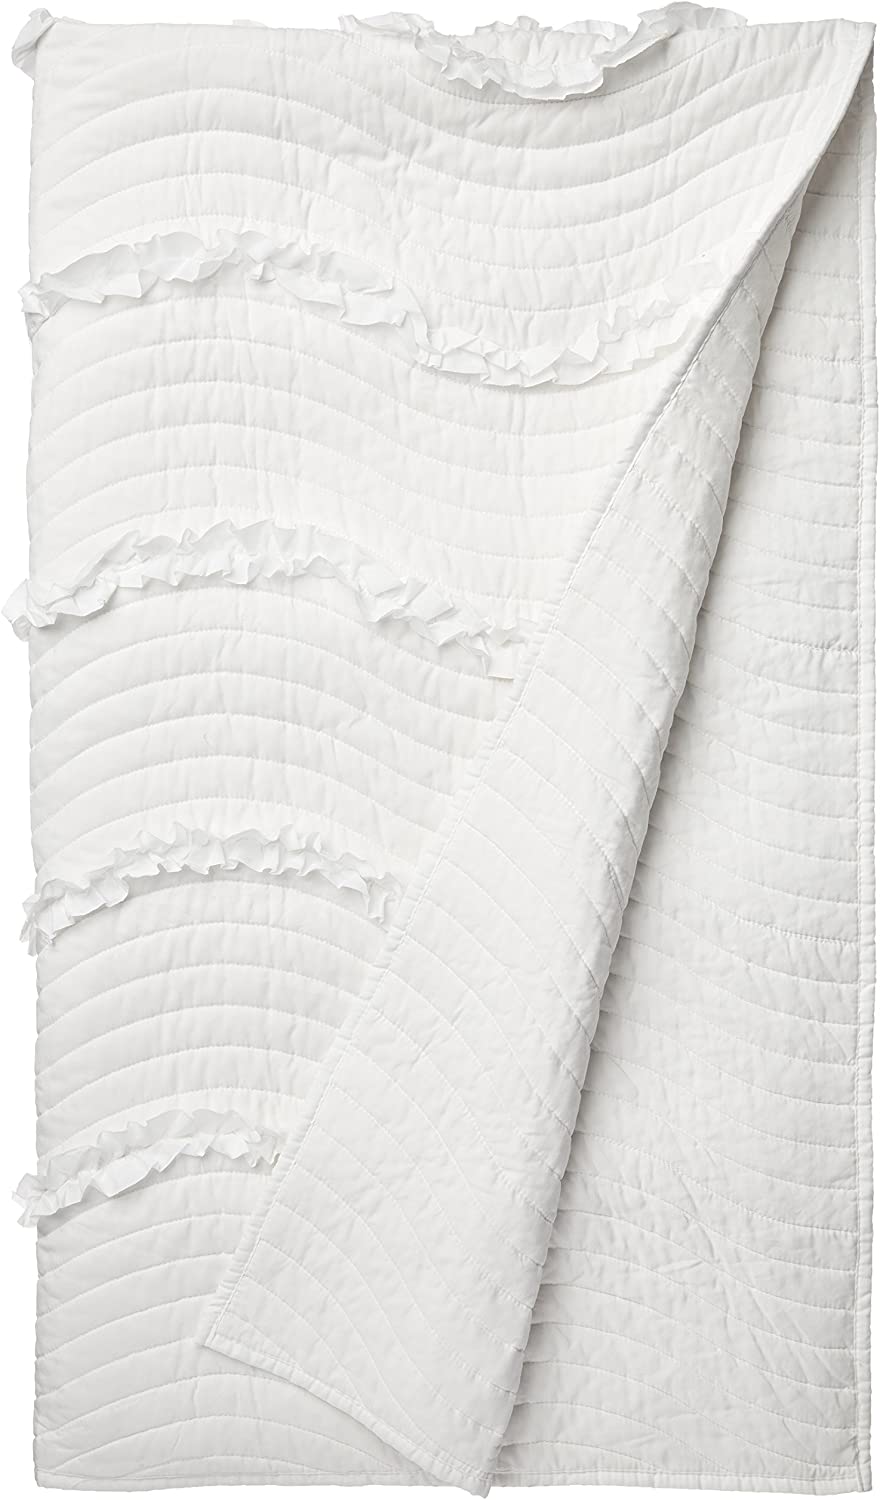 Madison Park Juliette Luxury Oversized Quilted Throw White 60x70 Quilted Premium Soft Cozy Microfiber With Ruffles For Bed, Couch or Sofa